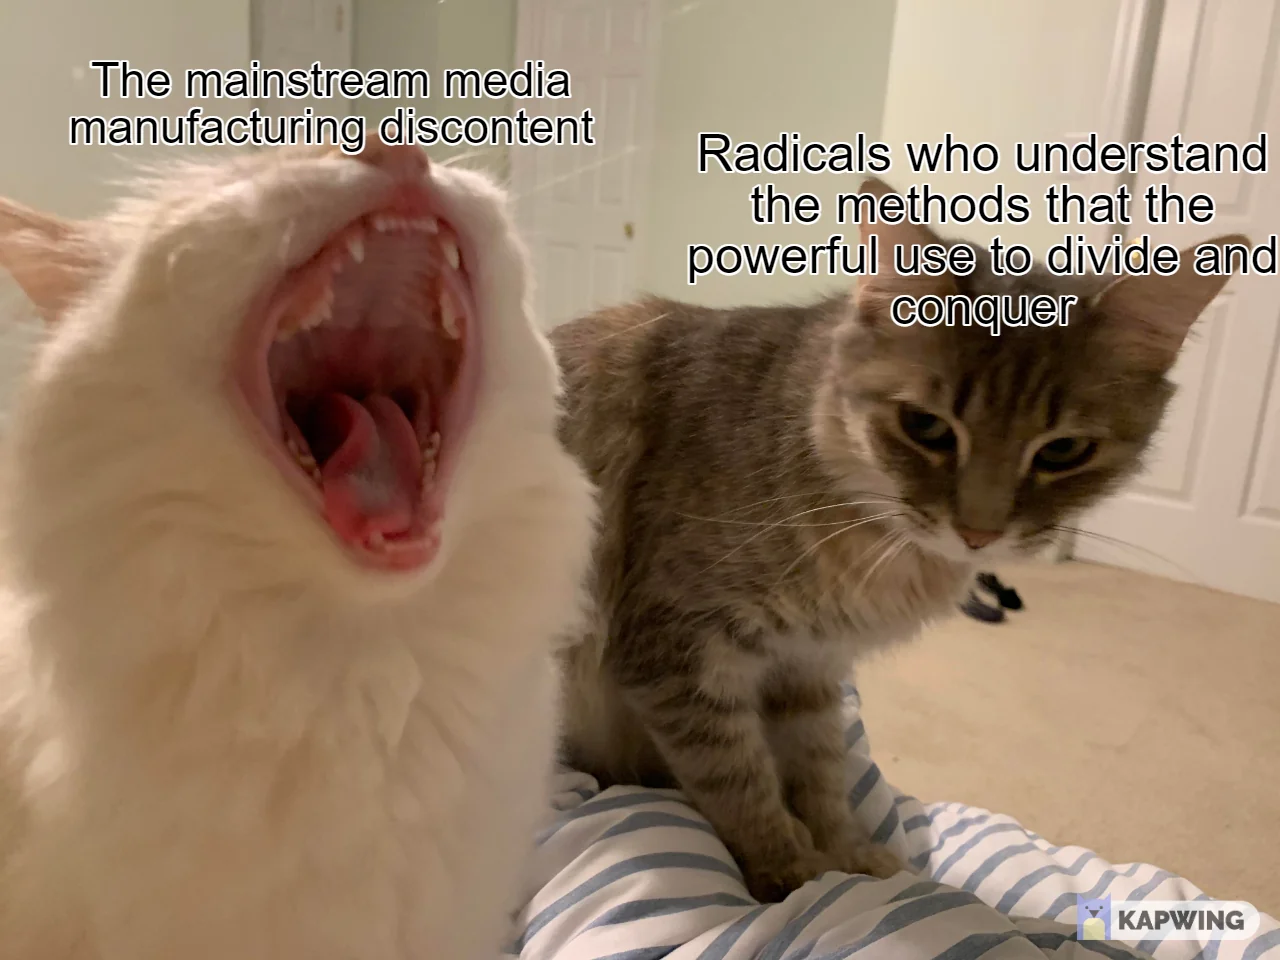 Picture is of two cats. The cat on the left is SCREAMING with wide open mouth and has the text 'The mainstream media
          manufacturing discontent' while the cat on the right is just kinda done with left cat's shit and is looking over like 'ugh
          so annoying' - right cat has the text 'Radicals who understand the methods that the powerful use to divide and conquer'